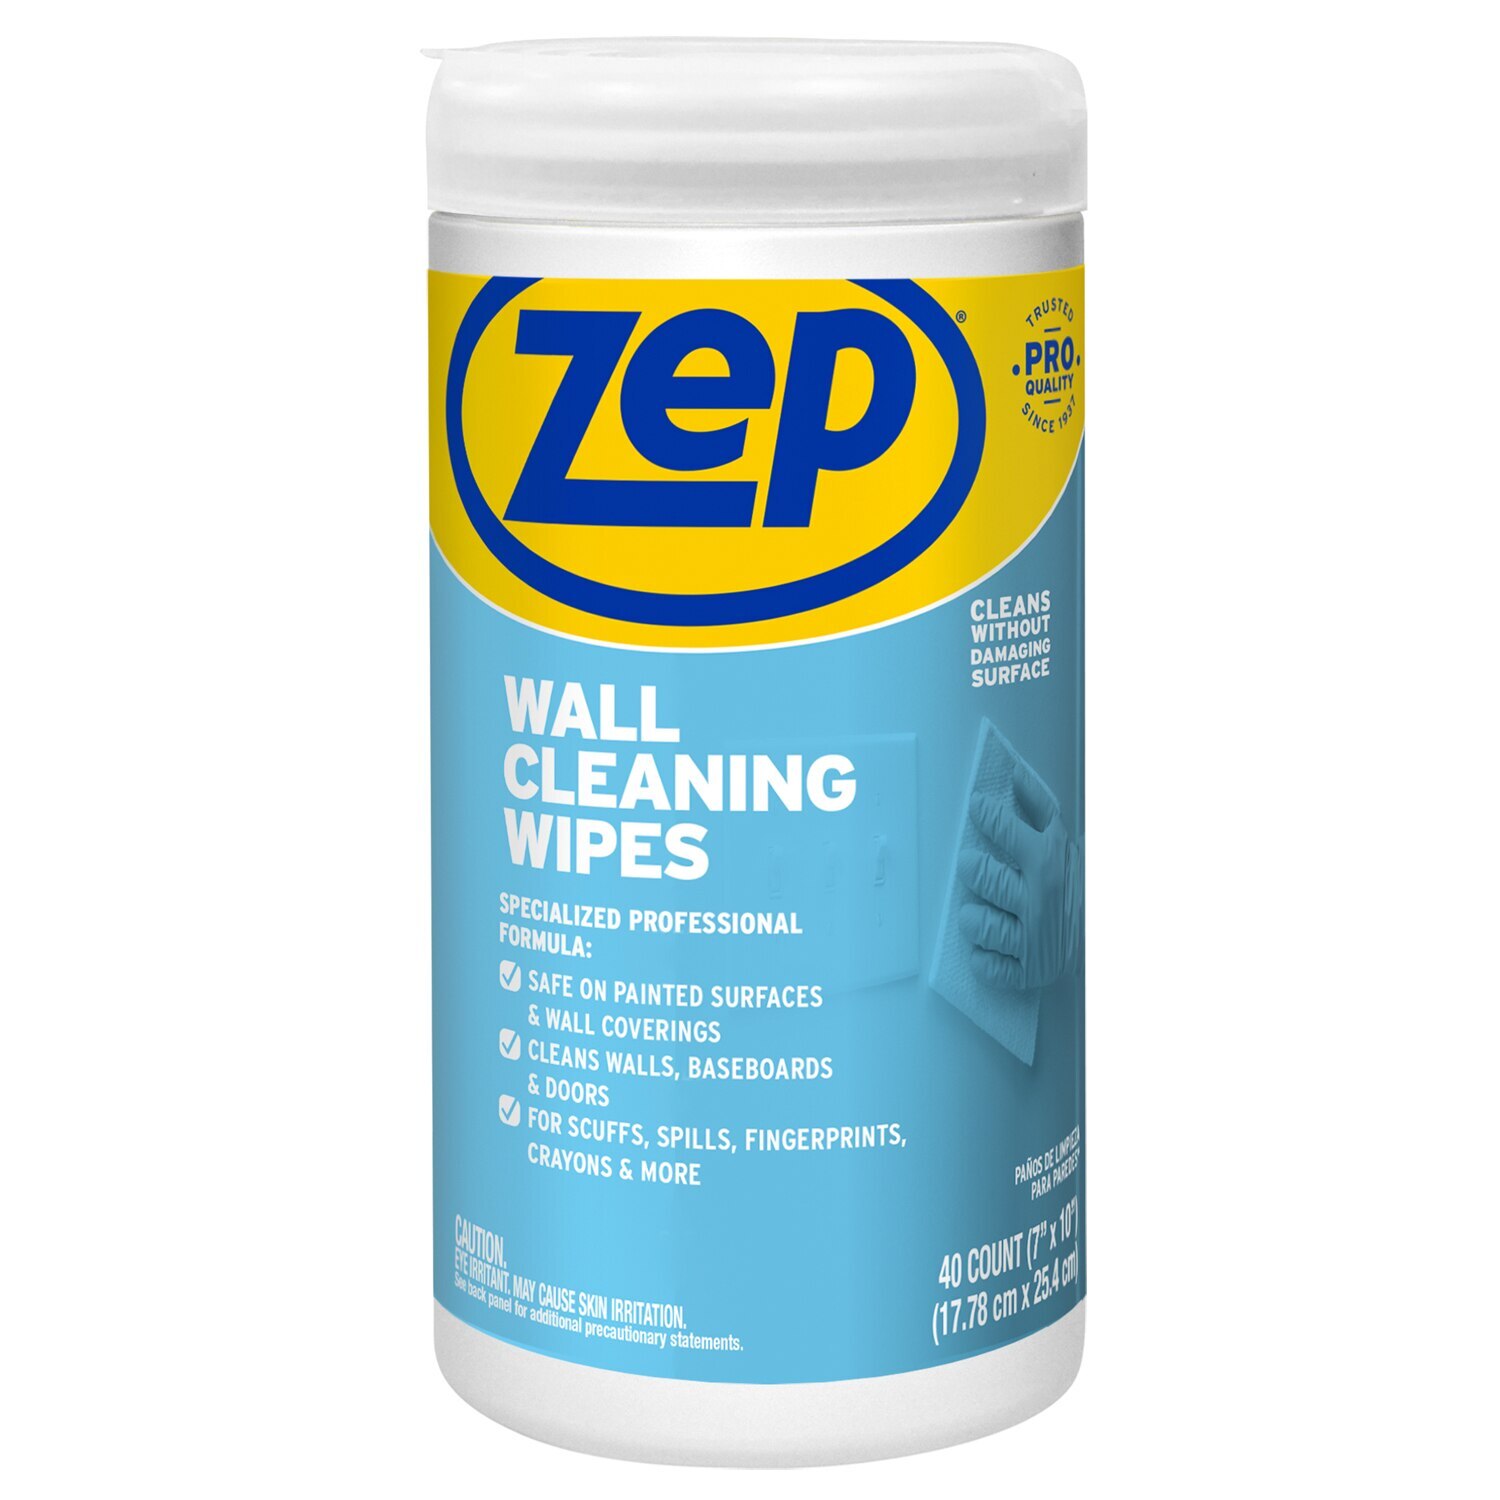 Zep Wall Cleaning Wipes